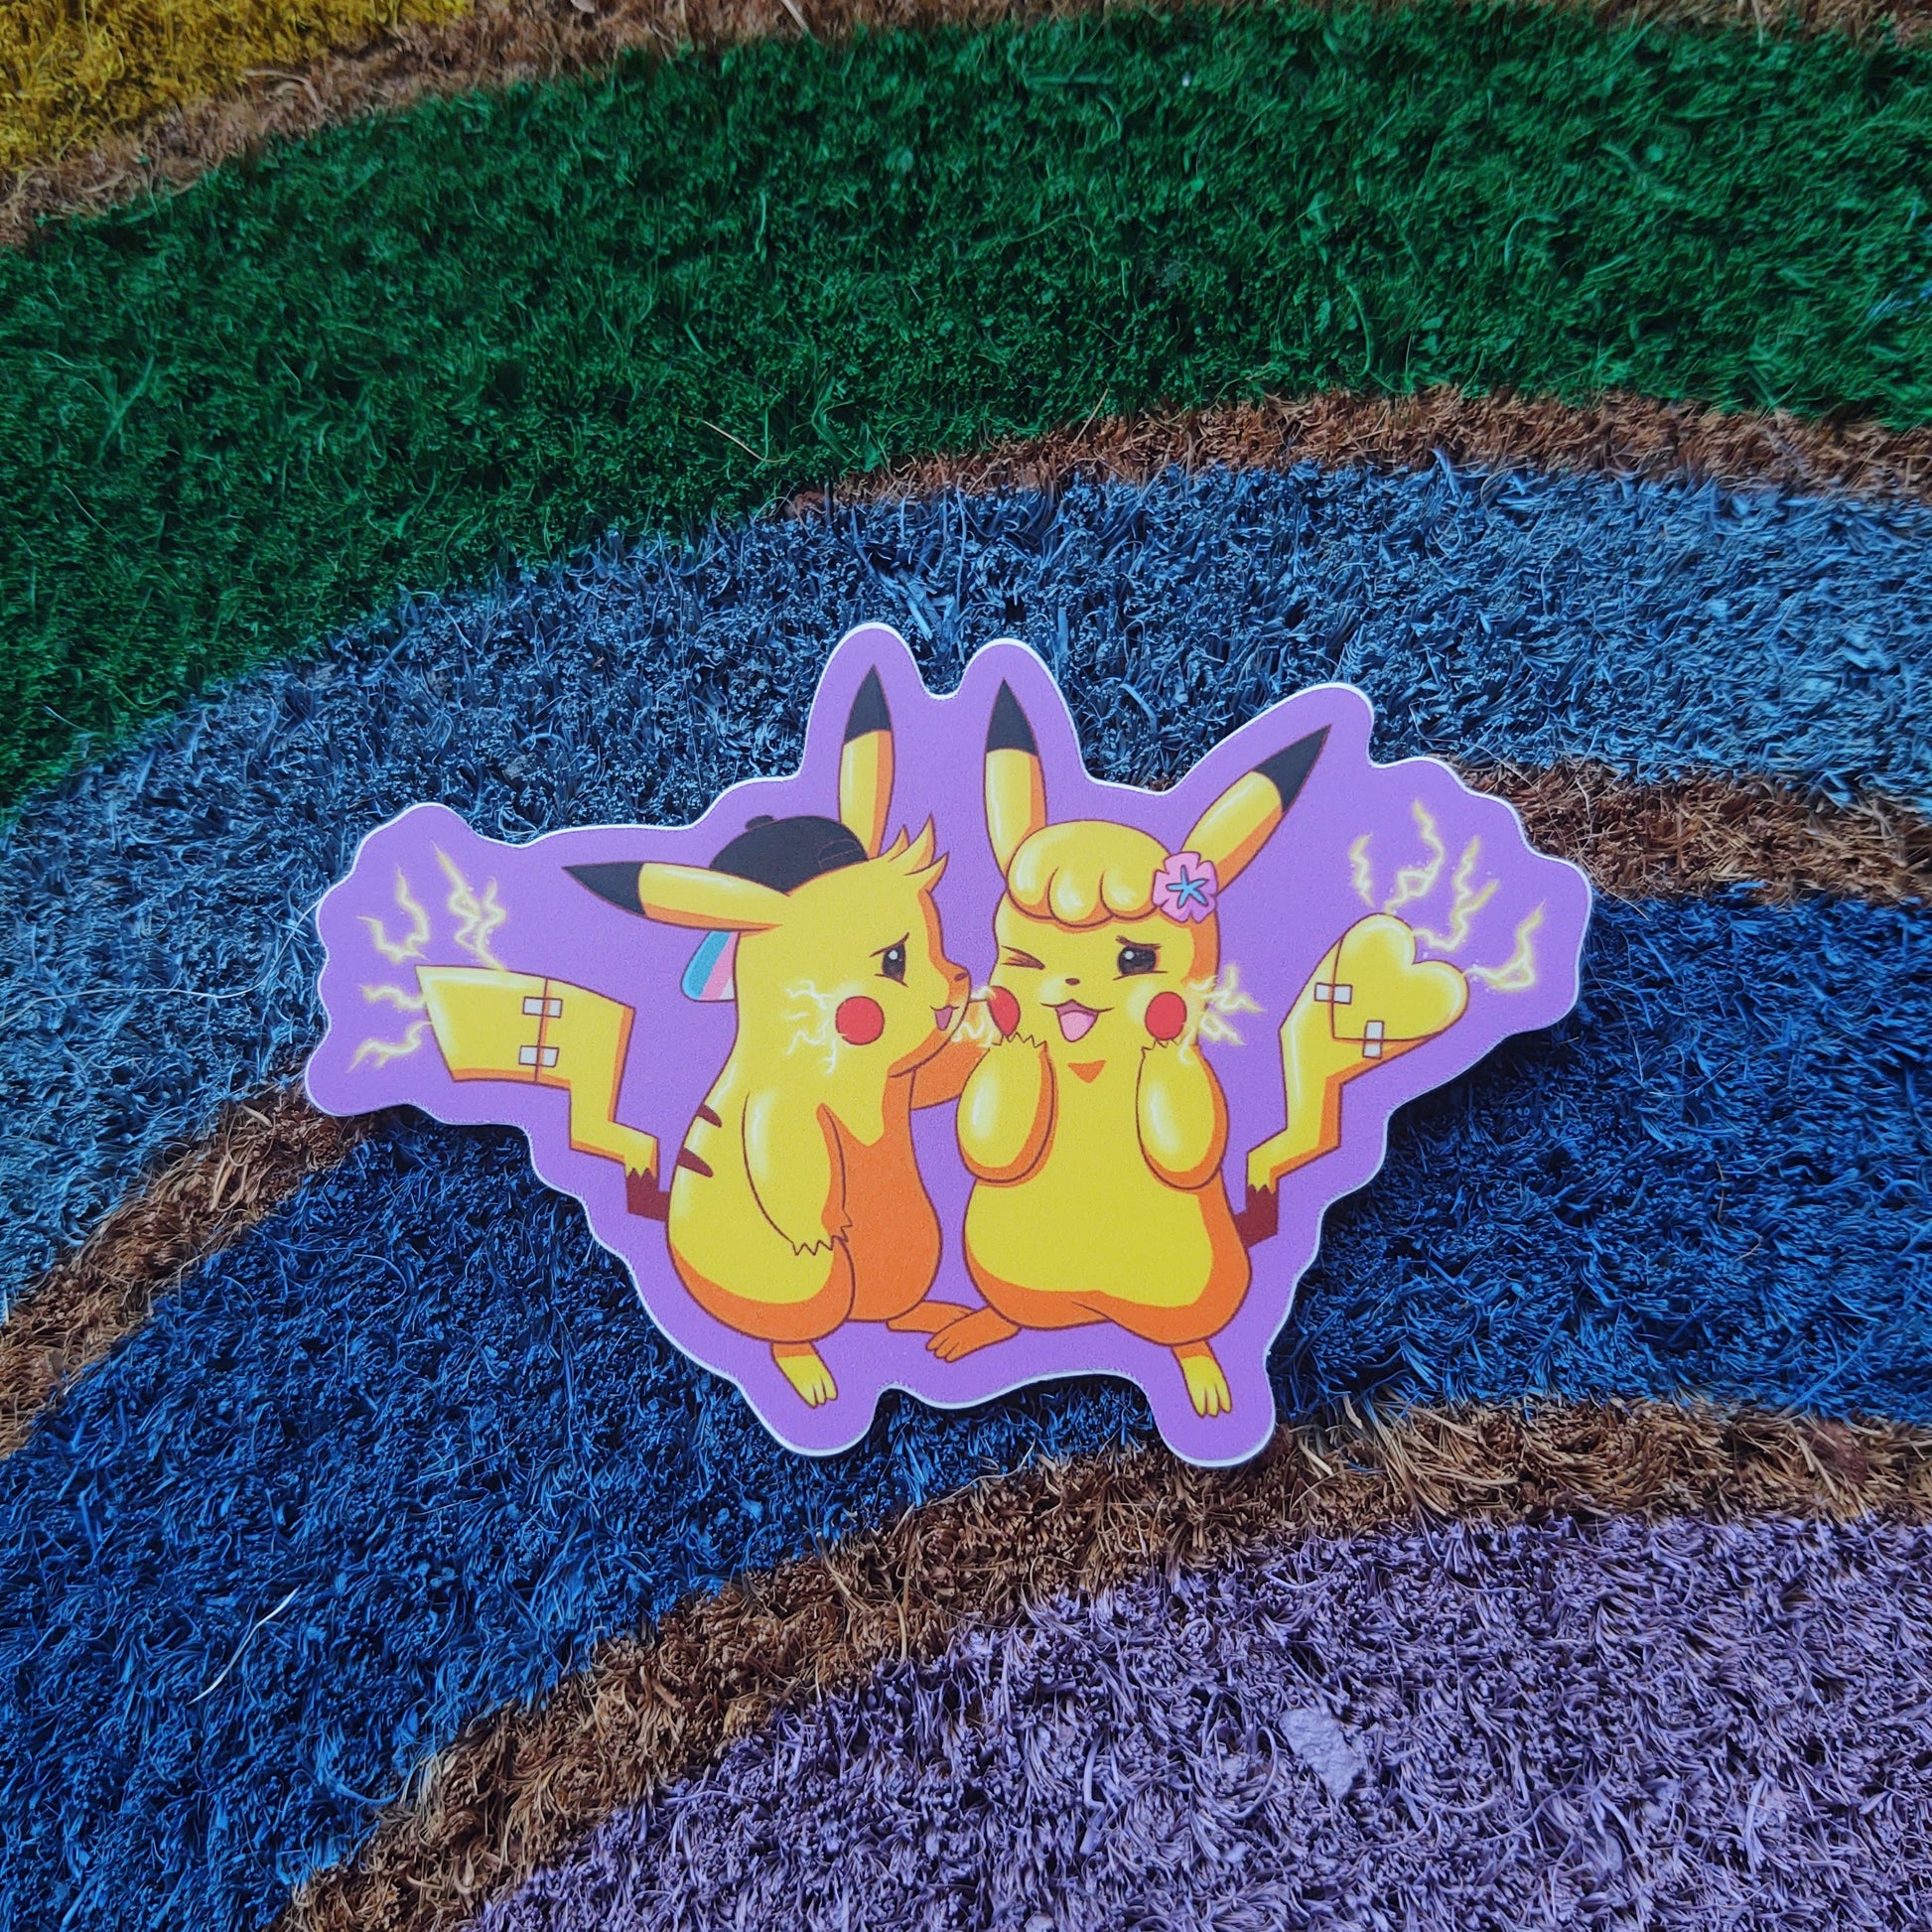 the trans for trans sticker on a rough rainbow background. the sticker is a pair of transgender animals with electric current flowing and a purple outline